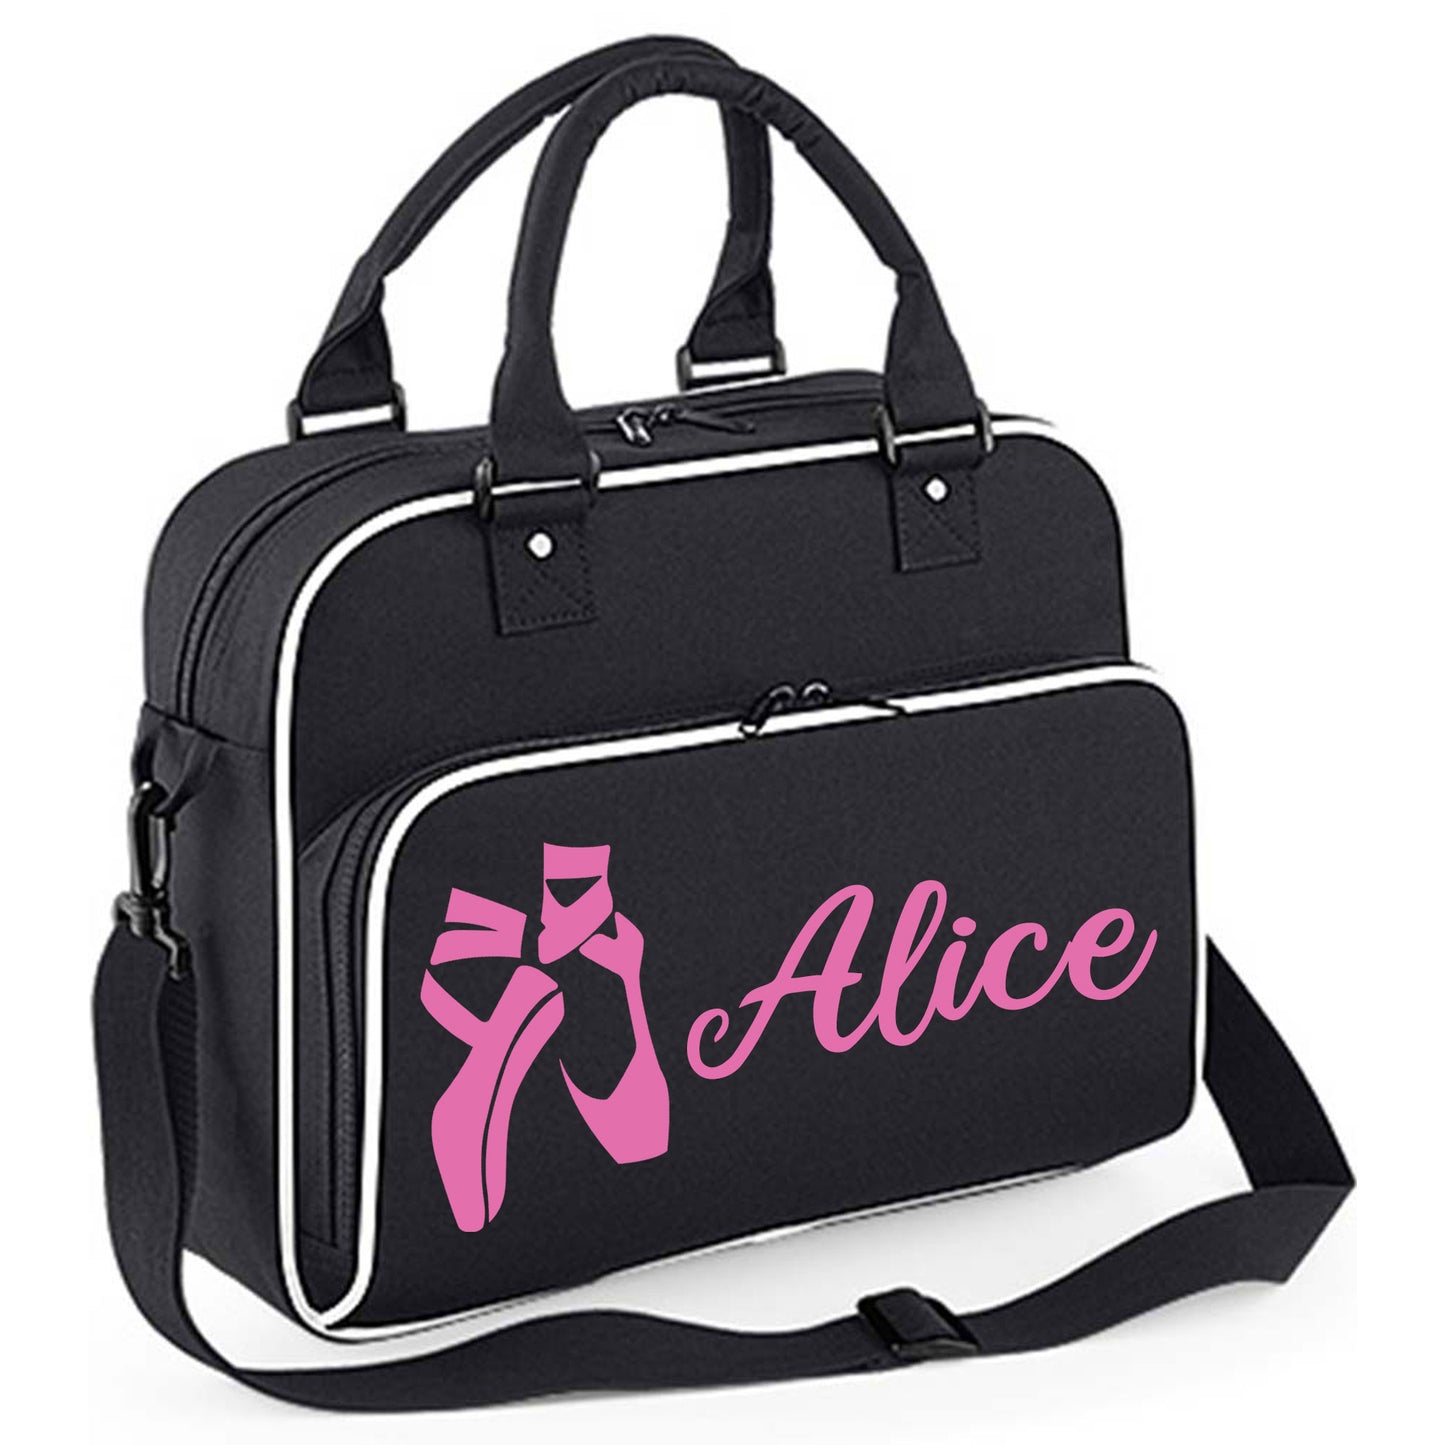 Personalised Dance Bag Kids | Girls Children's Ballet School Bag  - Always Looking Good - Black with White Piping Ballet Shoes 